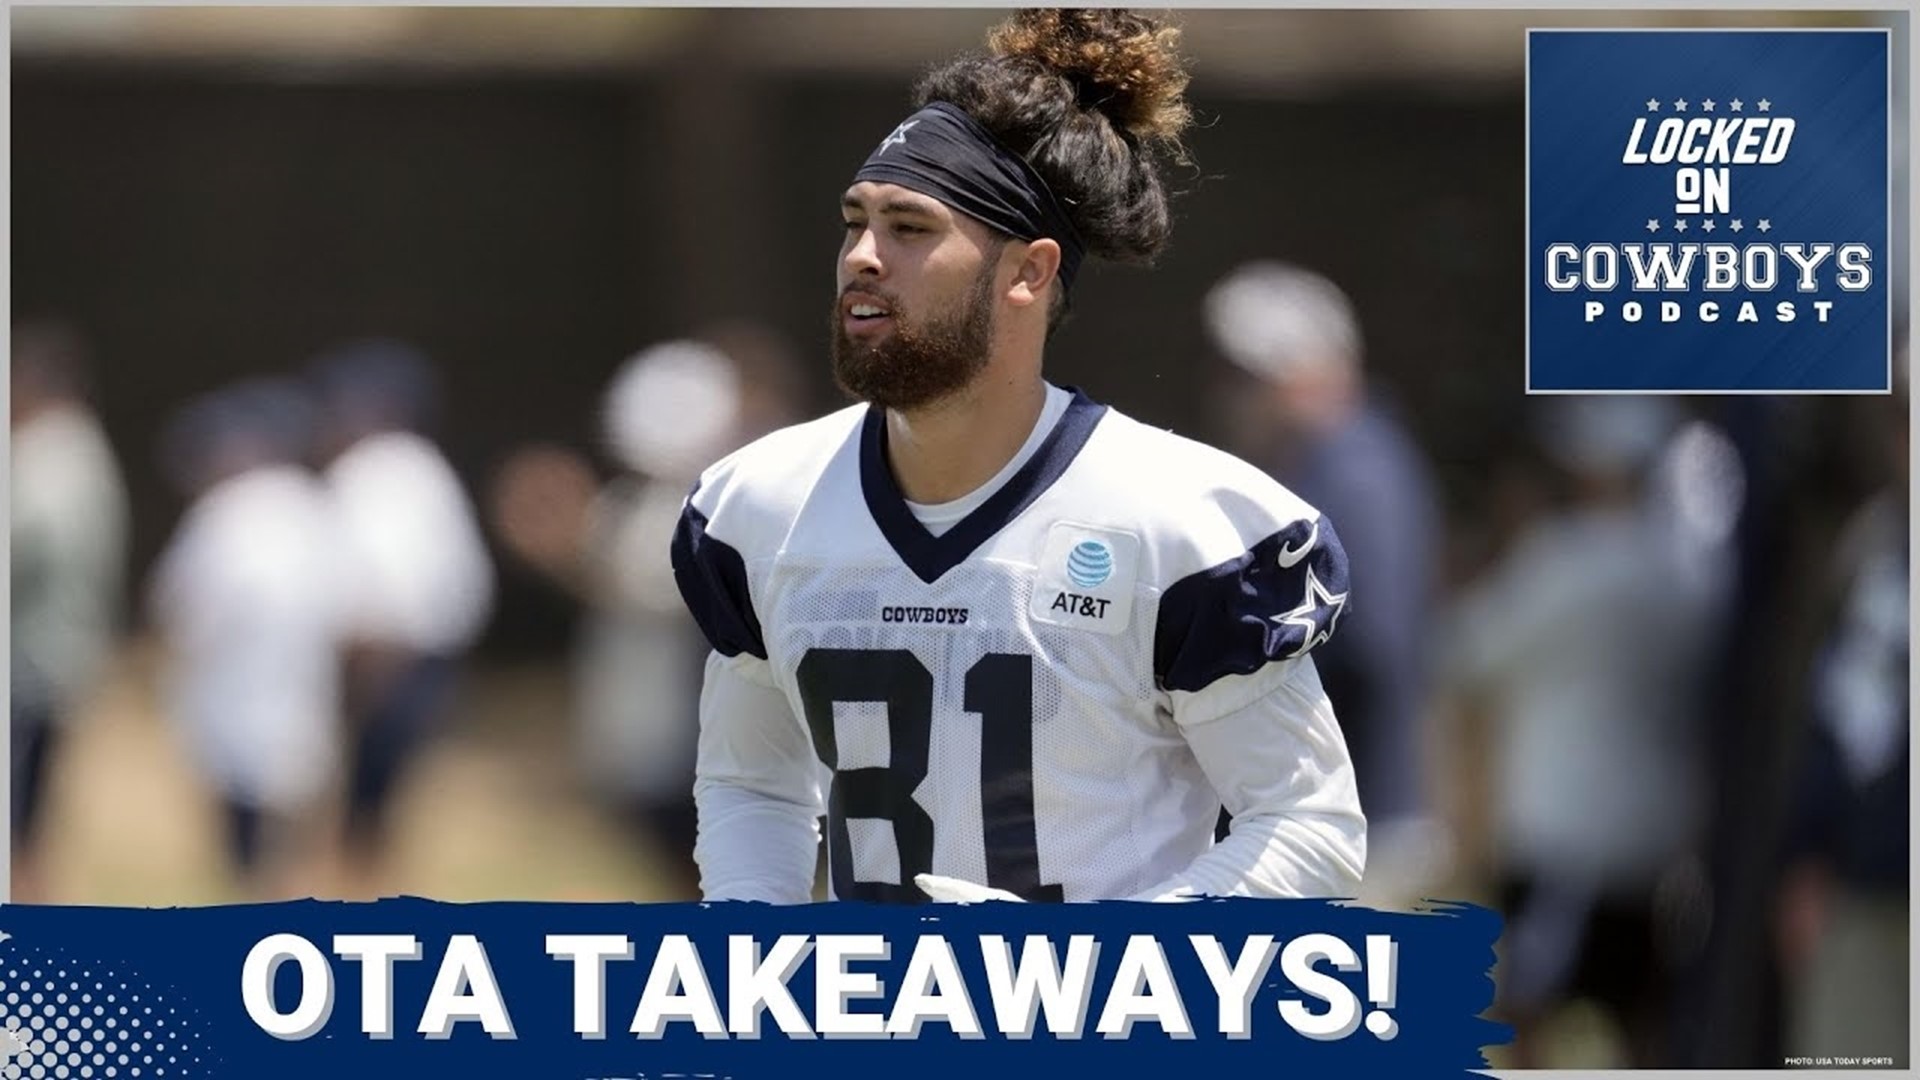 Marcus Mosher and Landon McCool review their notes from Week 2 of OTA practices for the Dallas Cowboys. They discuss the leadership of Brandin Cooks.